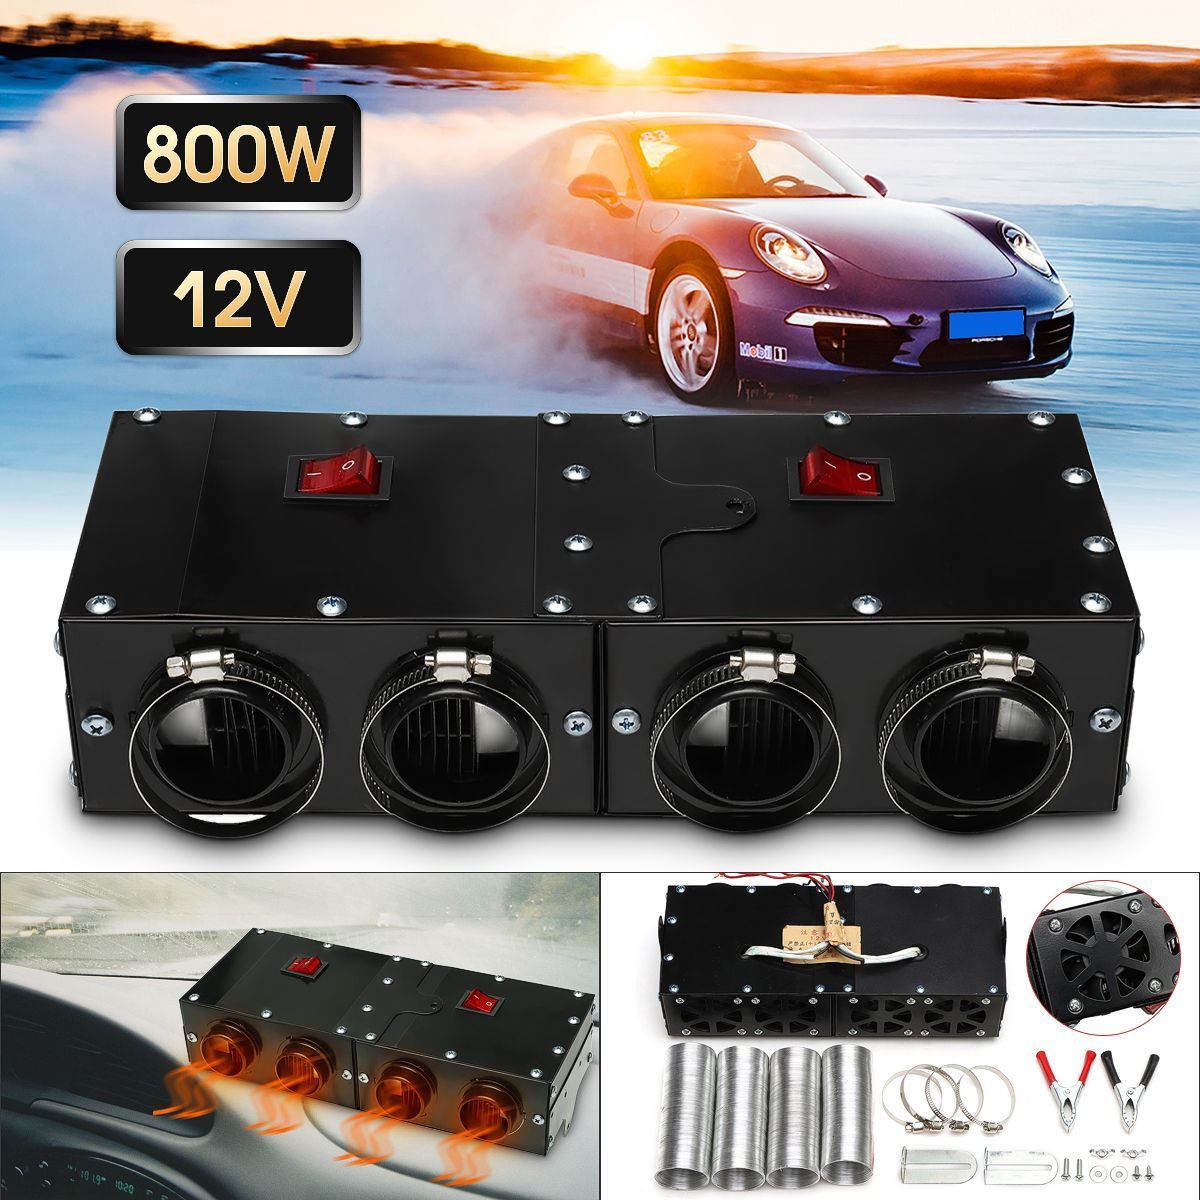 800W-12V-Car-Windscreen-Defrosting-Demister-Heating-Warmer-Car-Heater-with-Four-Fans-1303787